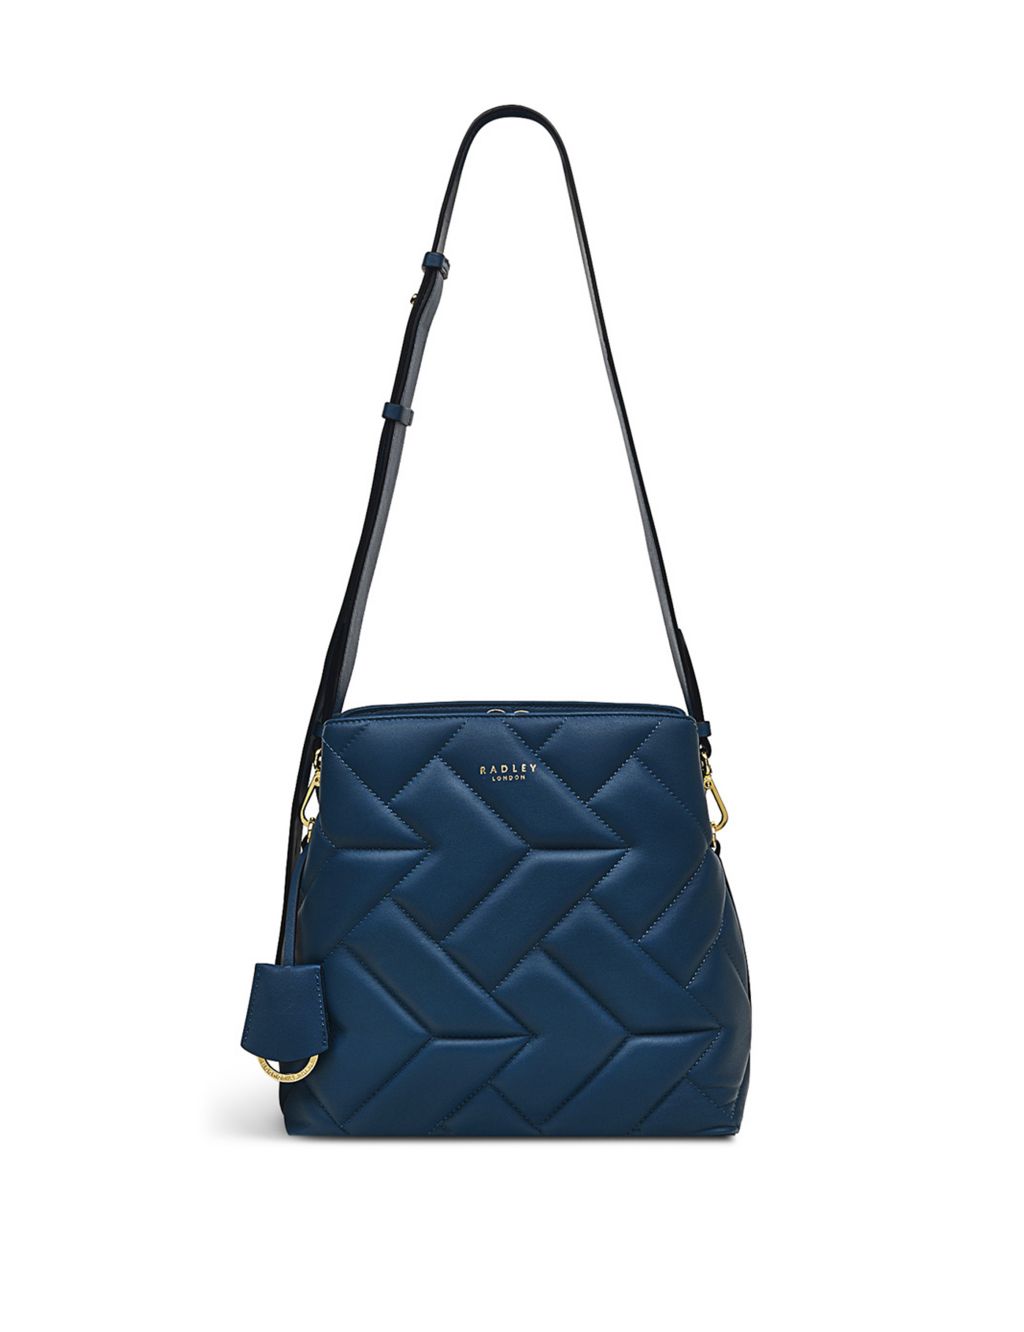 Dukes Place Leather Quilted Cross Body Bag